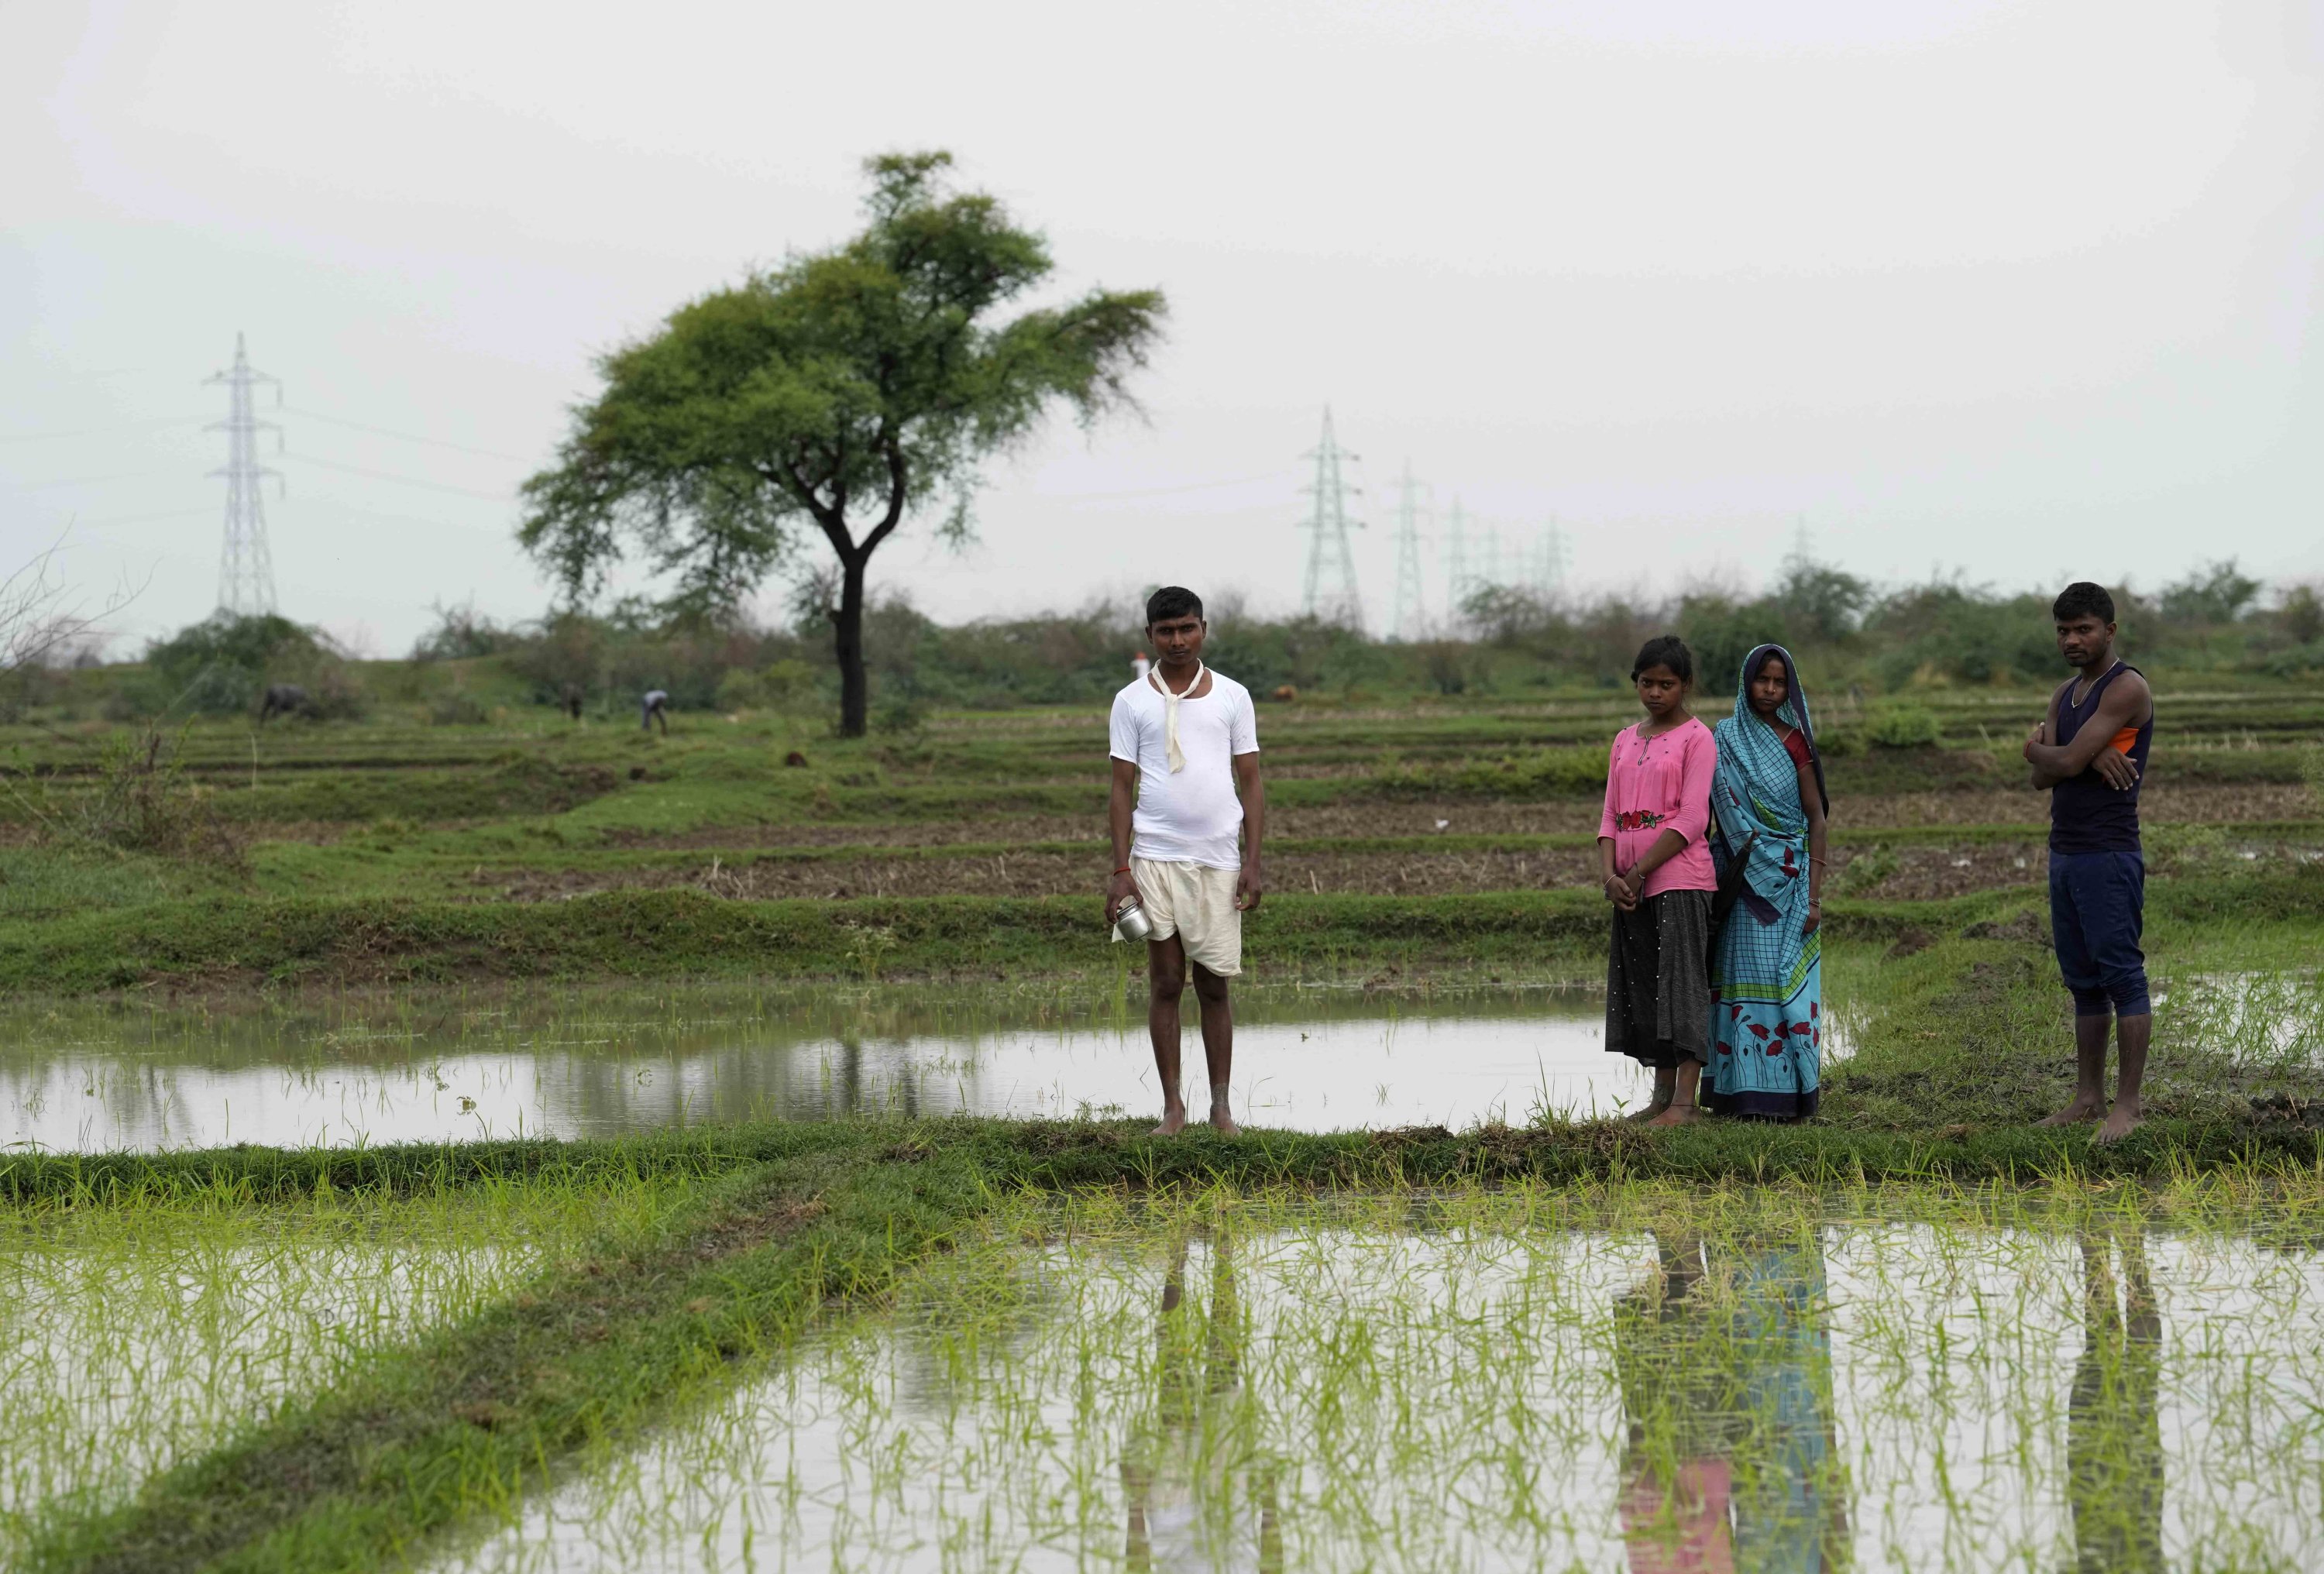 Shipra Bind, wearing pink, who survived a lightning strike, stands by the spot where her sister-in-law Khushboo was killed by lightning on June 25 in a paddy field at Piparaon village on the outskirts of Prayagraj, in the northern Indian state of Uttar Pradesh, July 28, 2022. (AP Photo)